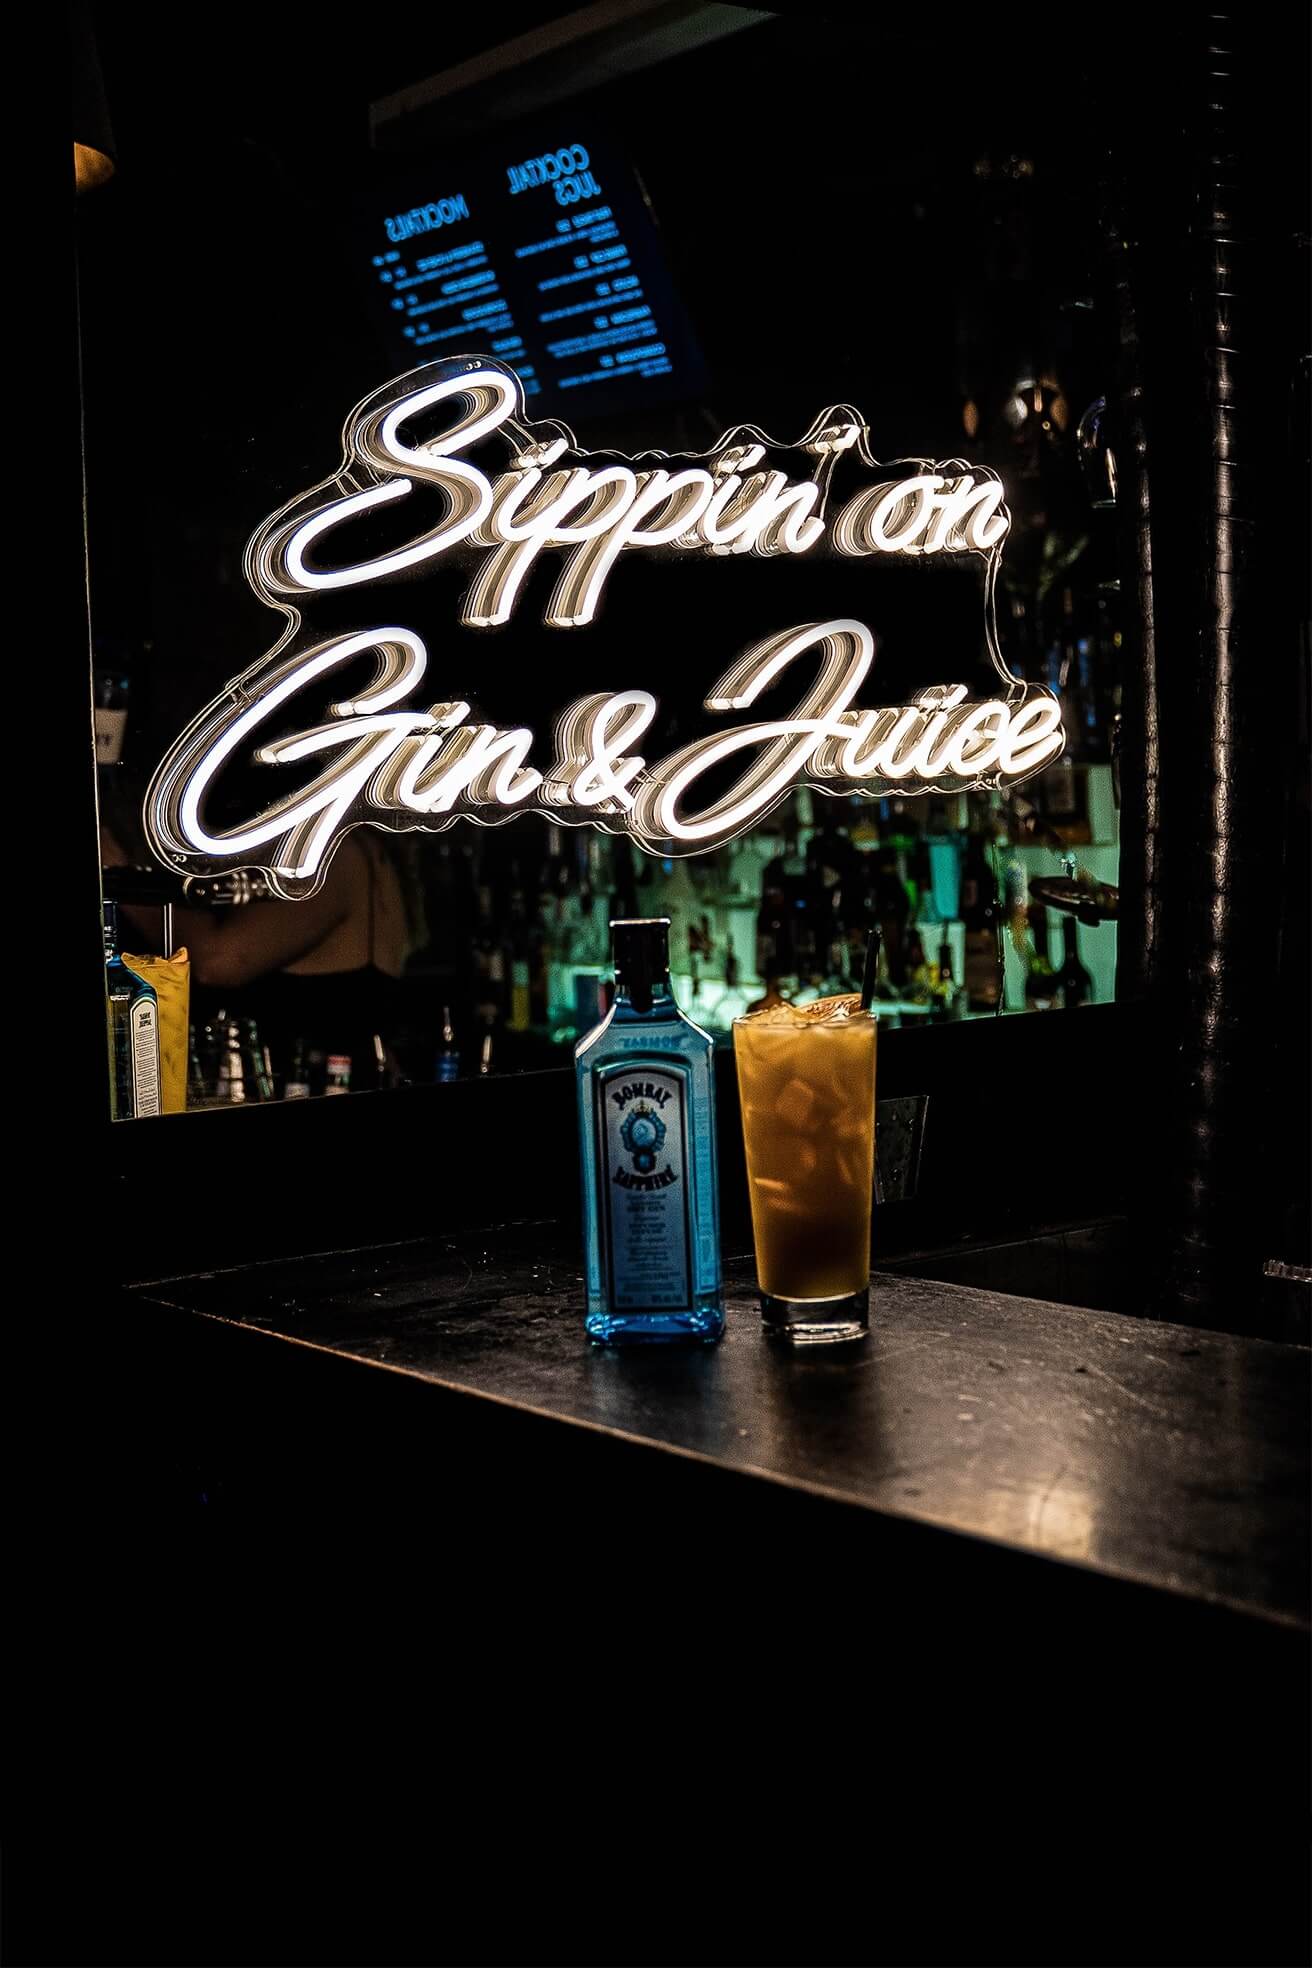 warm white sipping on gin and juice neon sign hanging inside bar